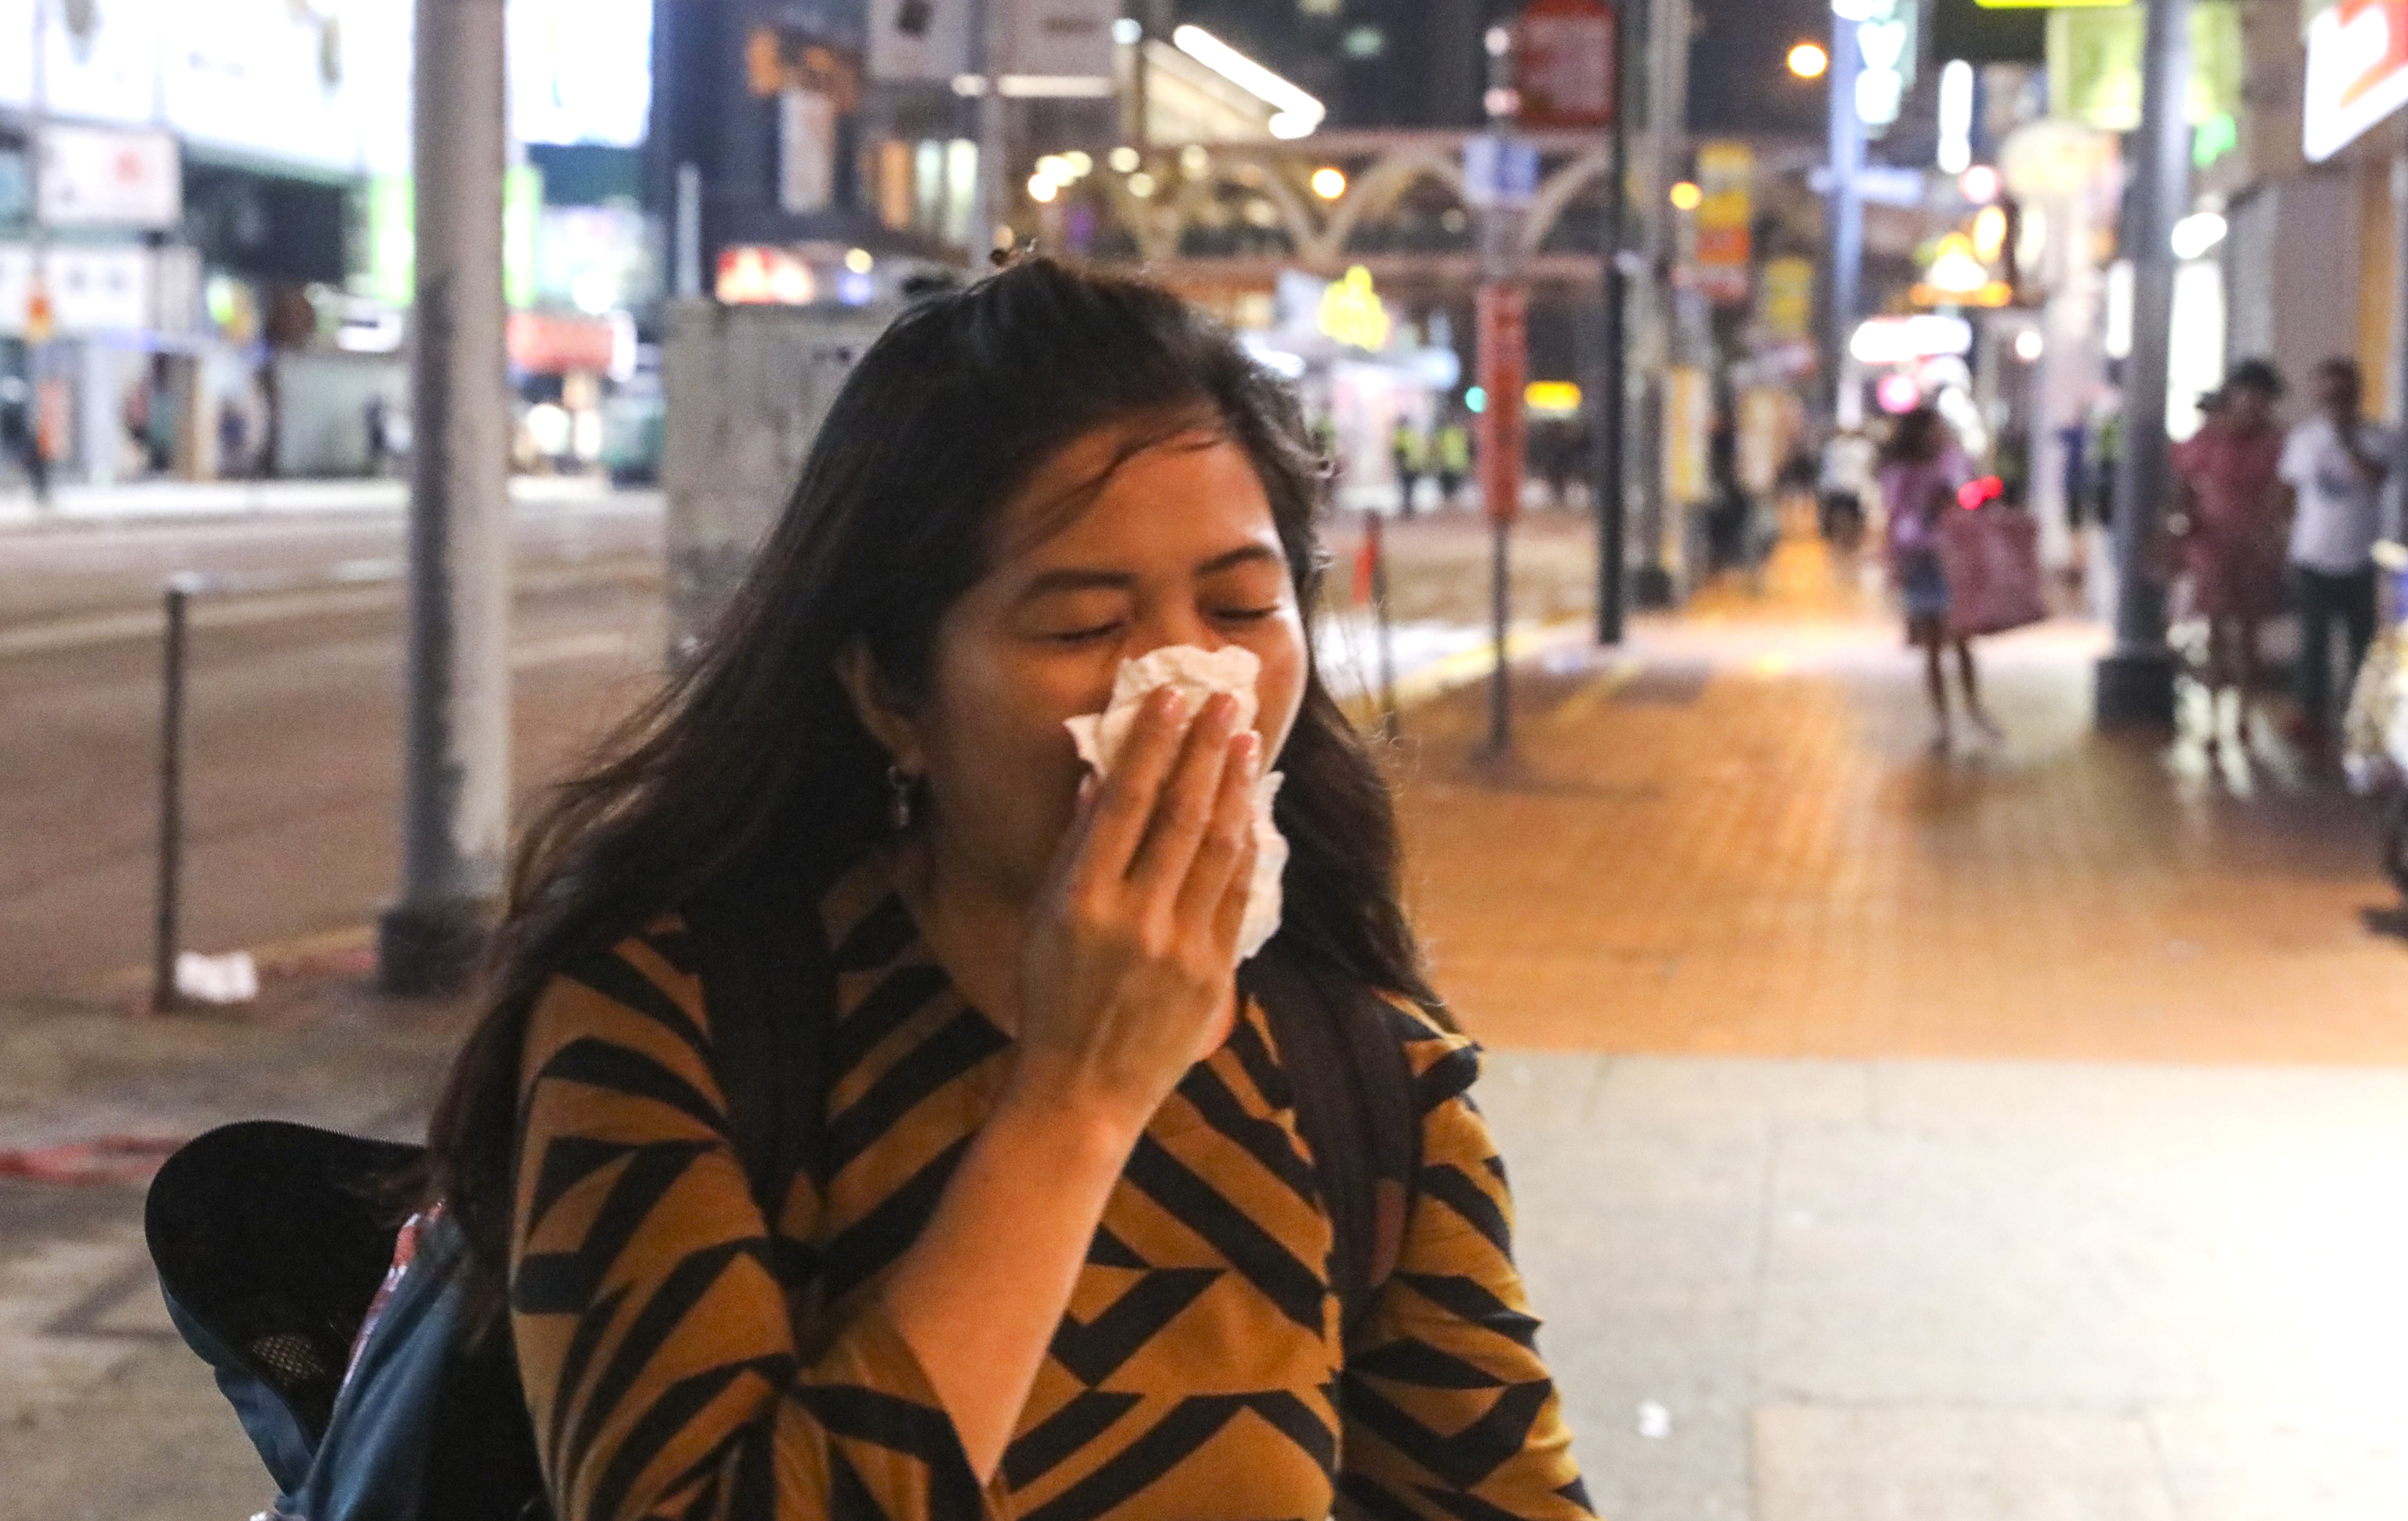 A woman reacts to tear gas in Causeway Bay where railings have been removed by anti-government protesters. Photo: K. Y. Cheng